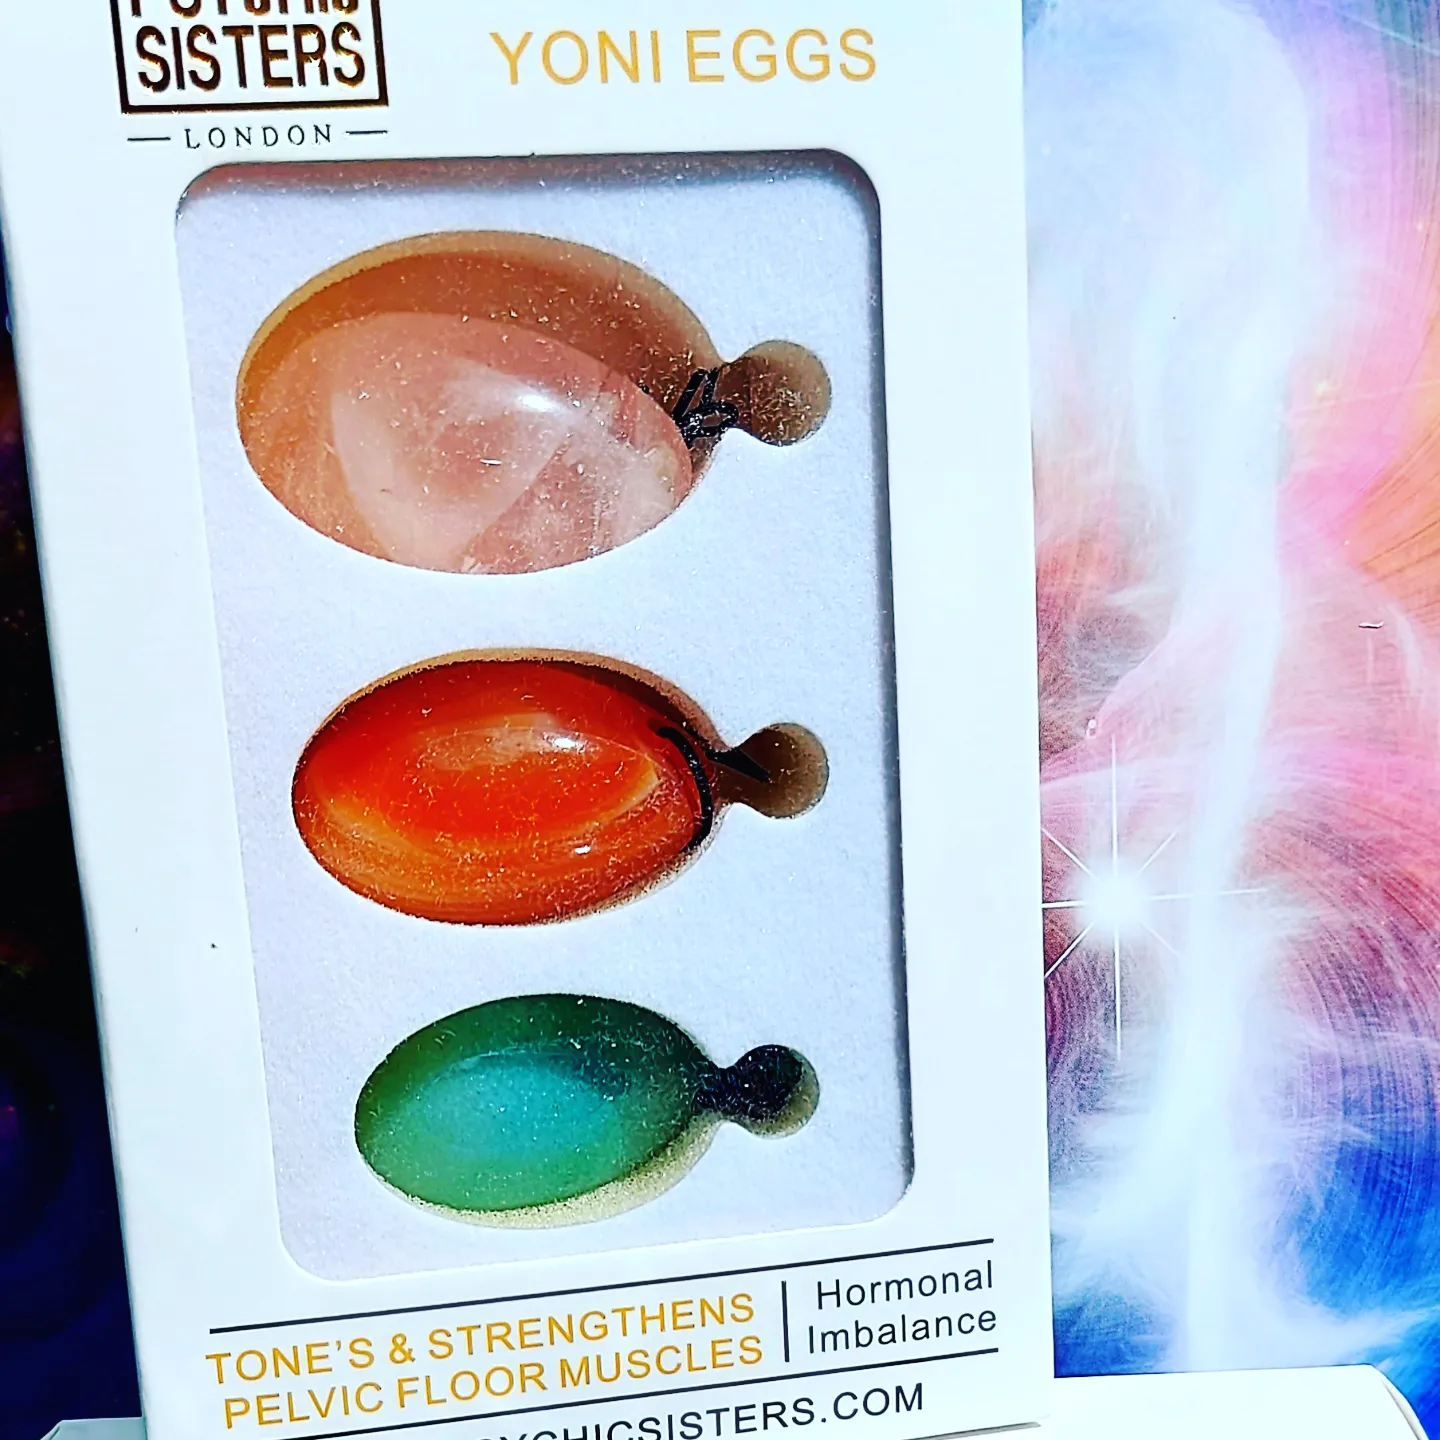 PSYCHIC SISTERS YONI EGGS